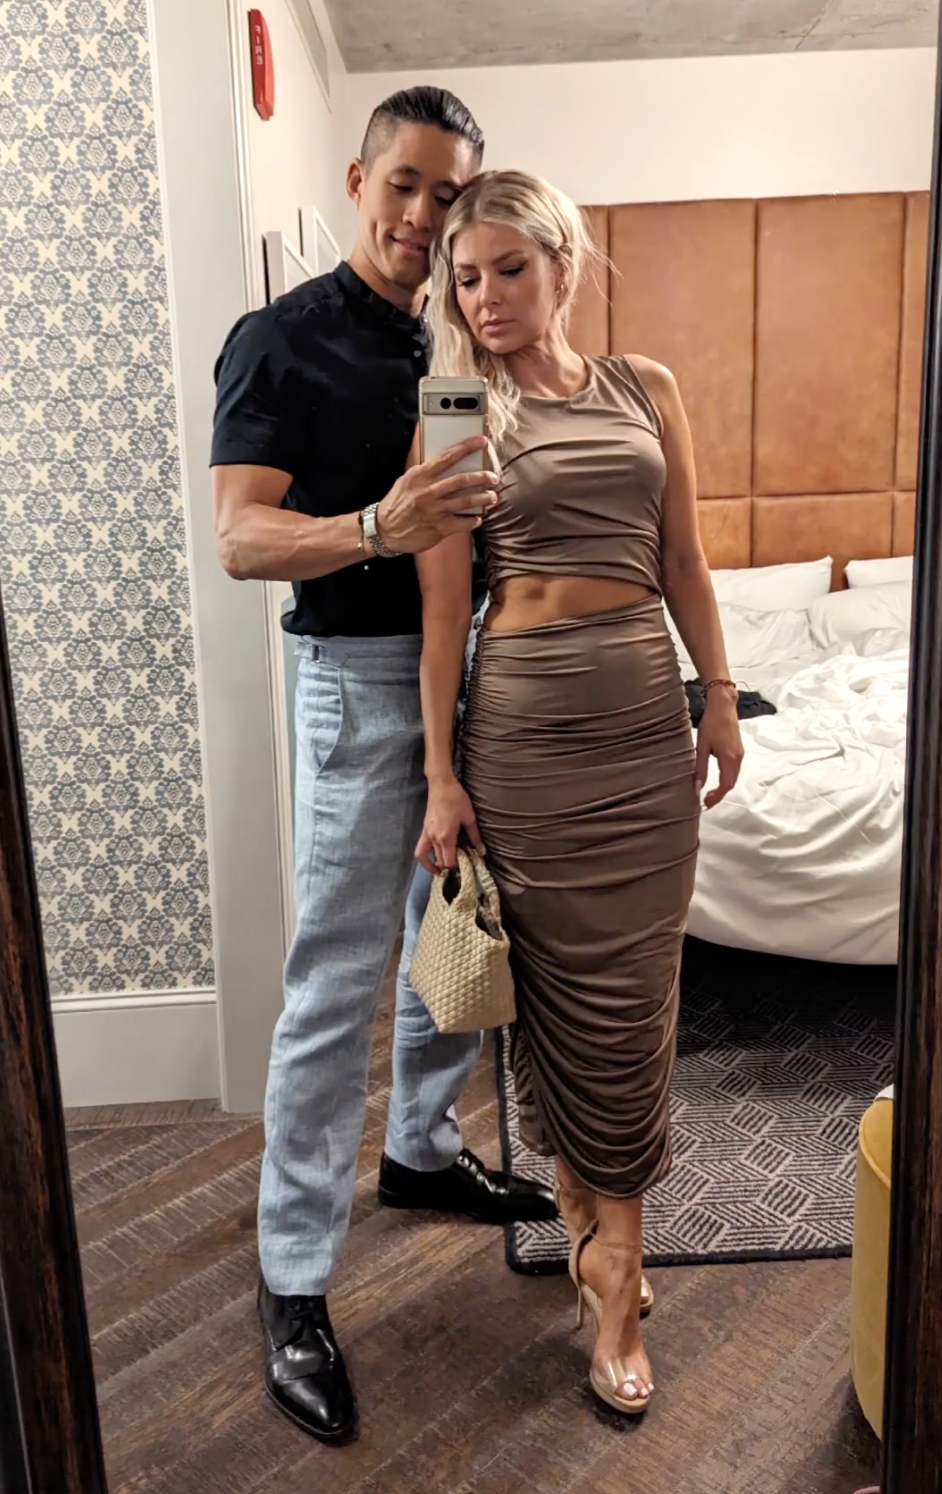 Ariana Madix's Boyfriend Daniel Gets Offered 'Pump Rules' as In-Flight Entertainment: 'Should I Watch?'